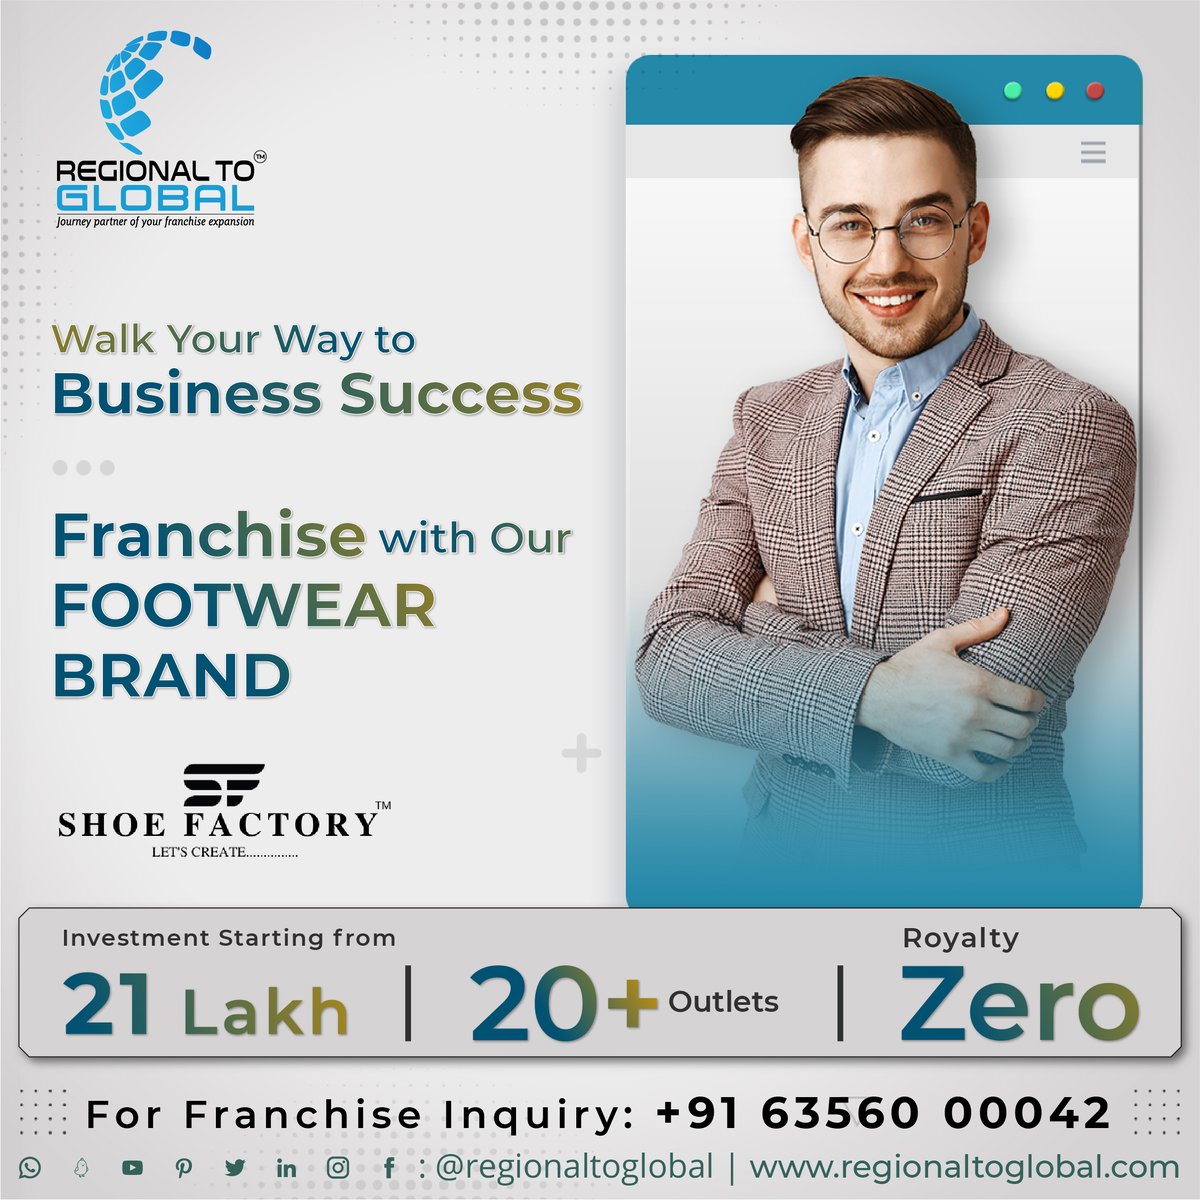 Walk Your Way to Business Success
Franchise with our FOOTWEAR BRAND

#FootwearFranchise #lowinvestmentbusiness #businessidea #footwearbusines #BusinessPotential #businesssuccession #WalkYourWay #footwearbrandindia #joinfranchise #franchisenetwork